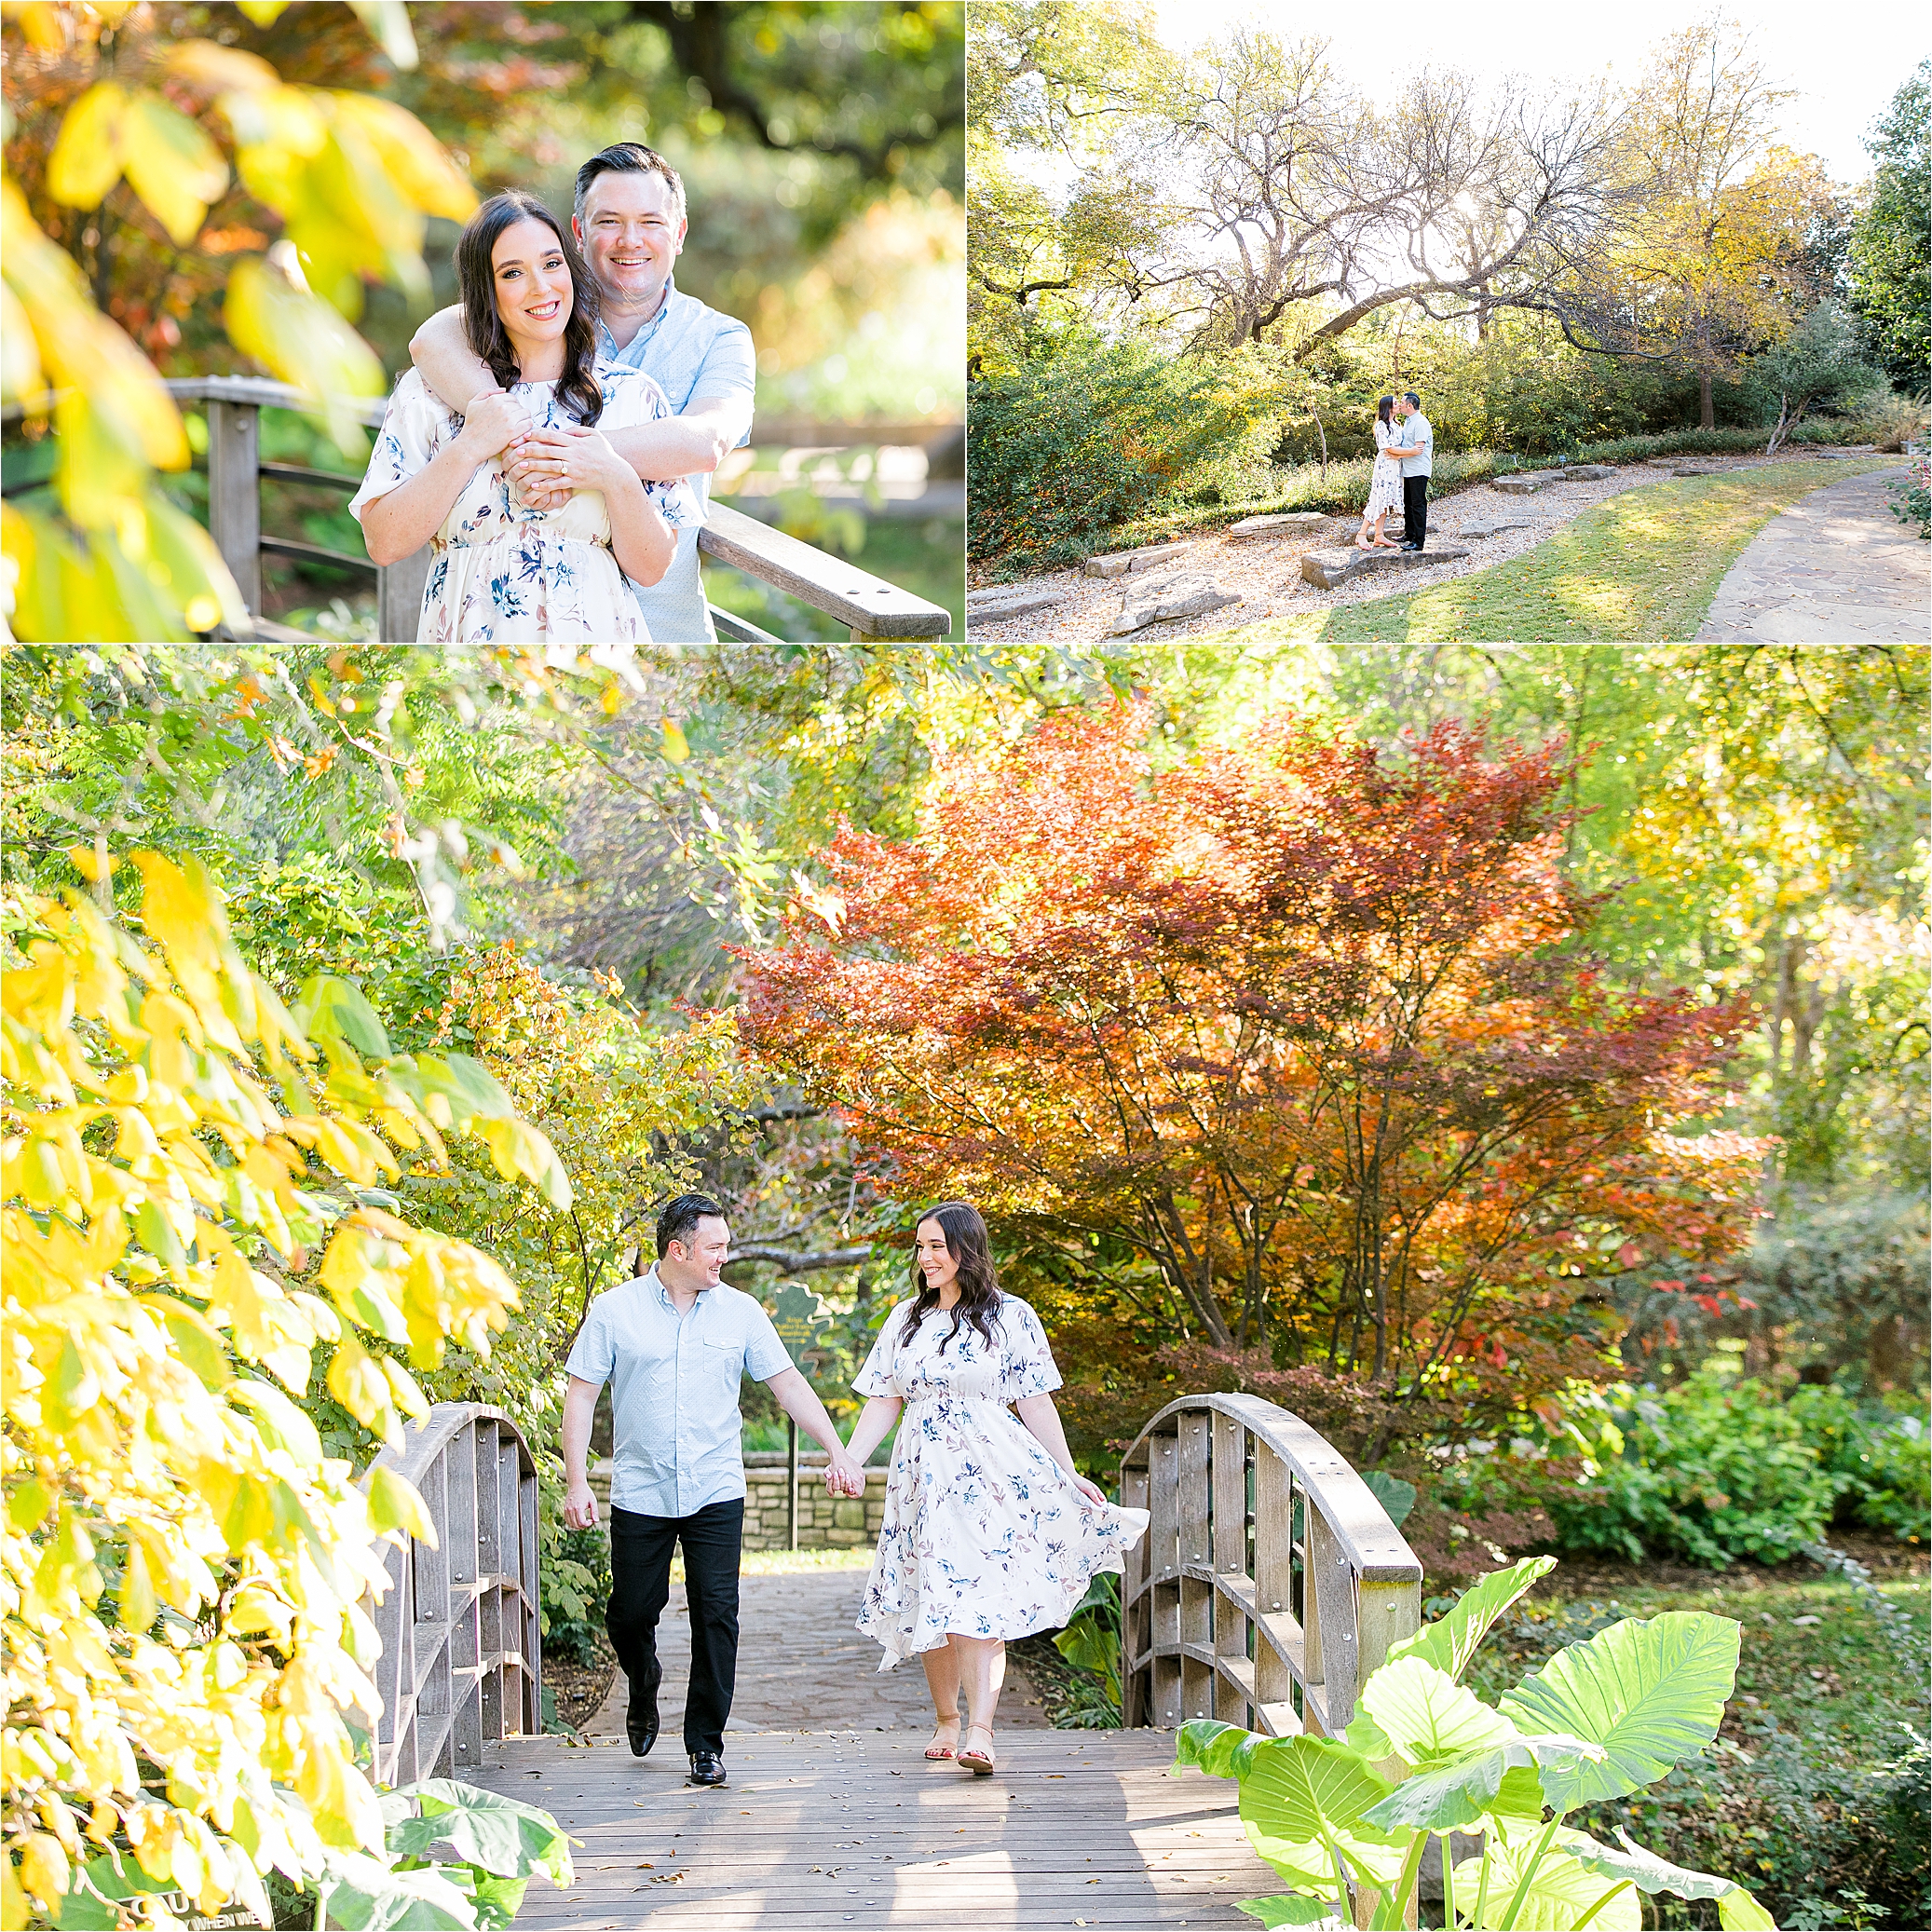 A couple happily walking together and embracing on a sunny, ,fall day during their Fort Worth Engagement at The Botanic Garden